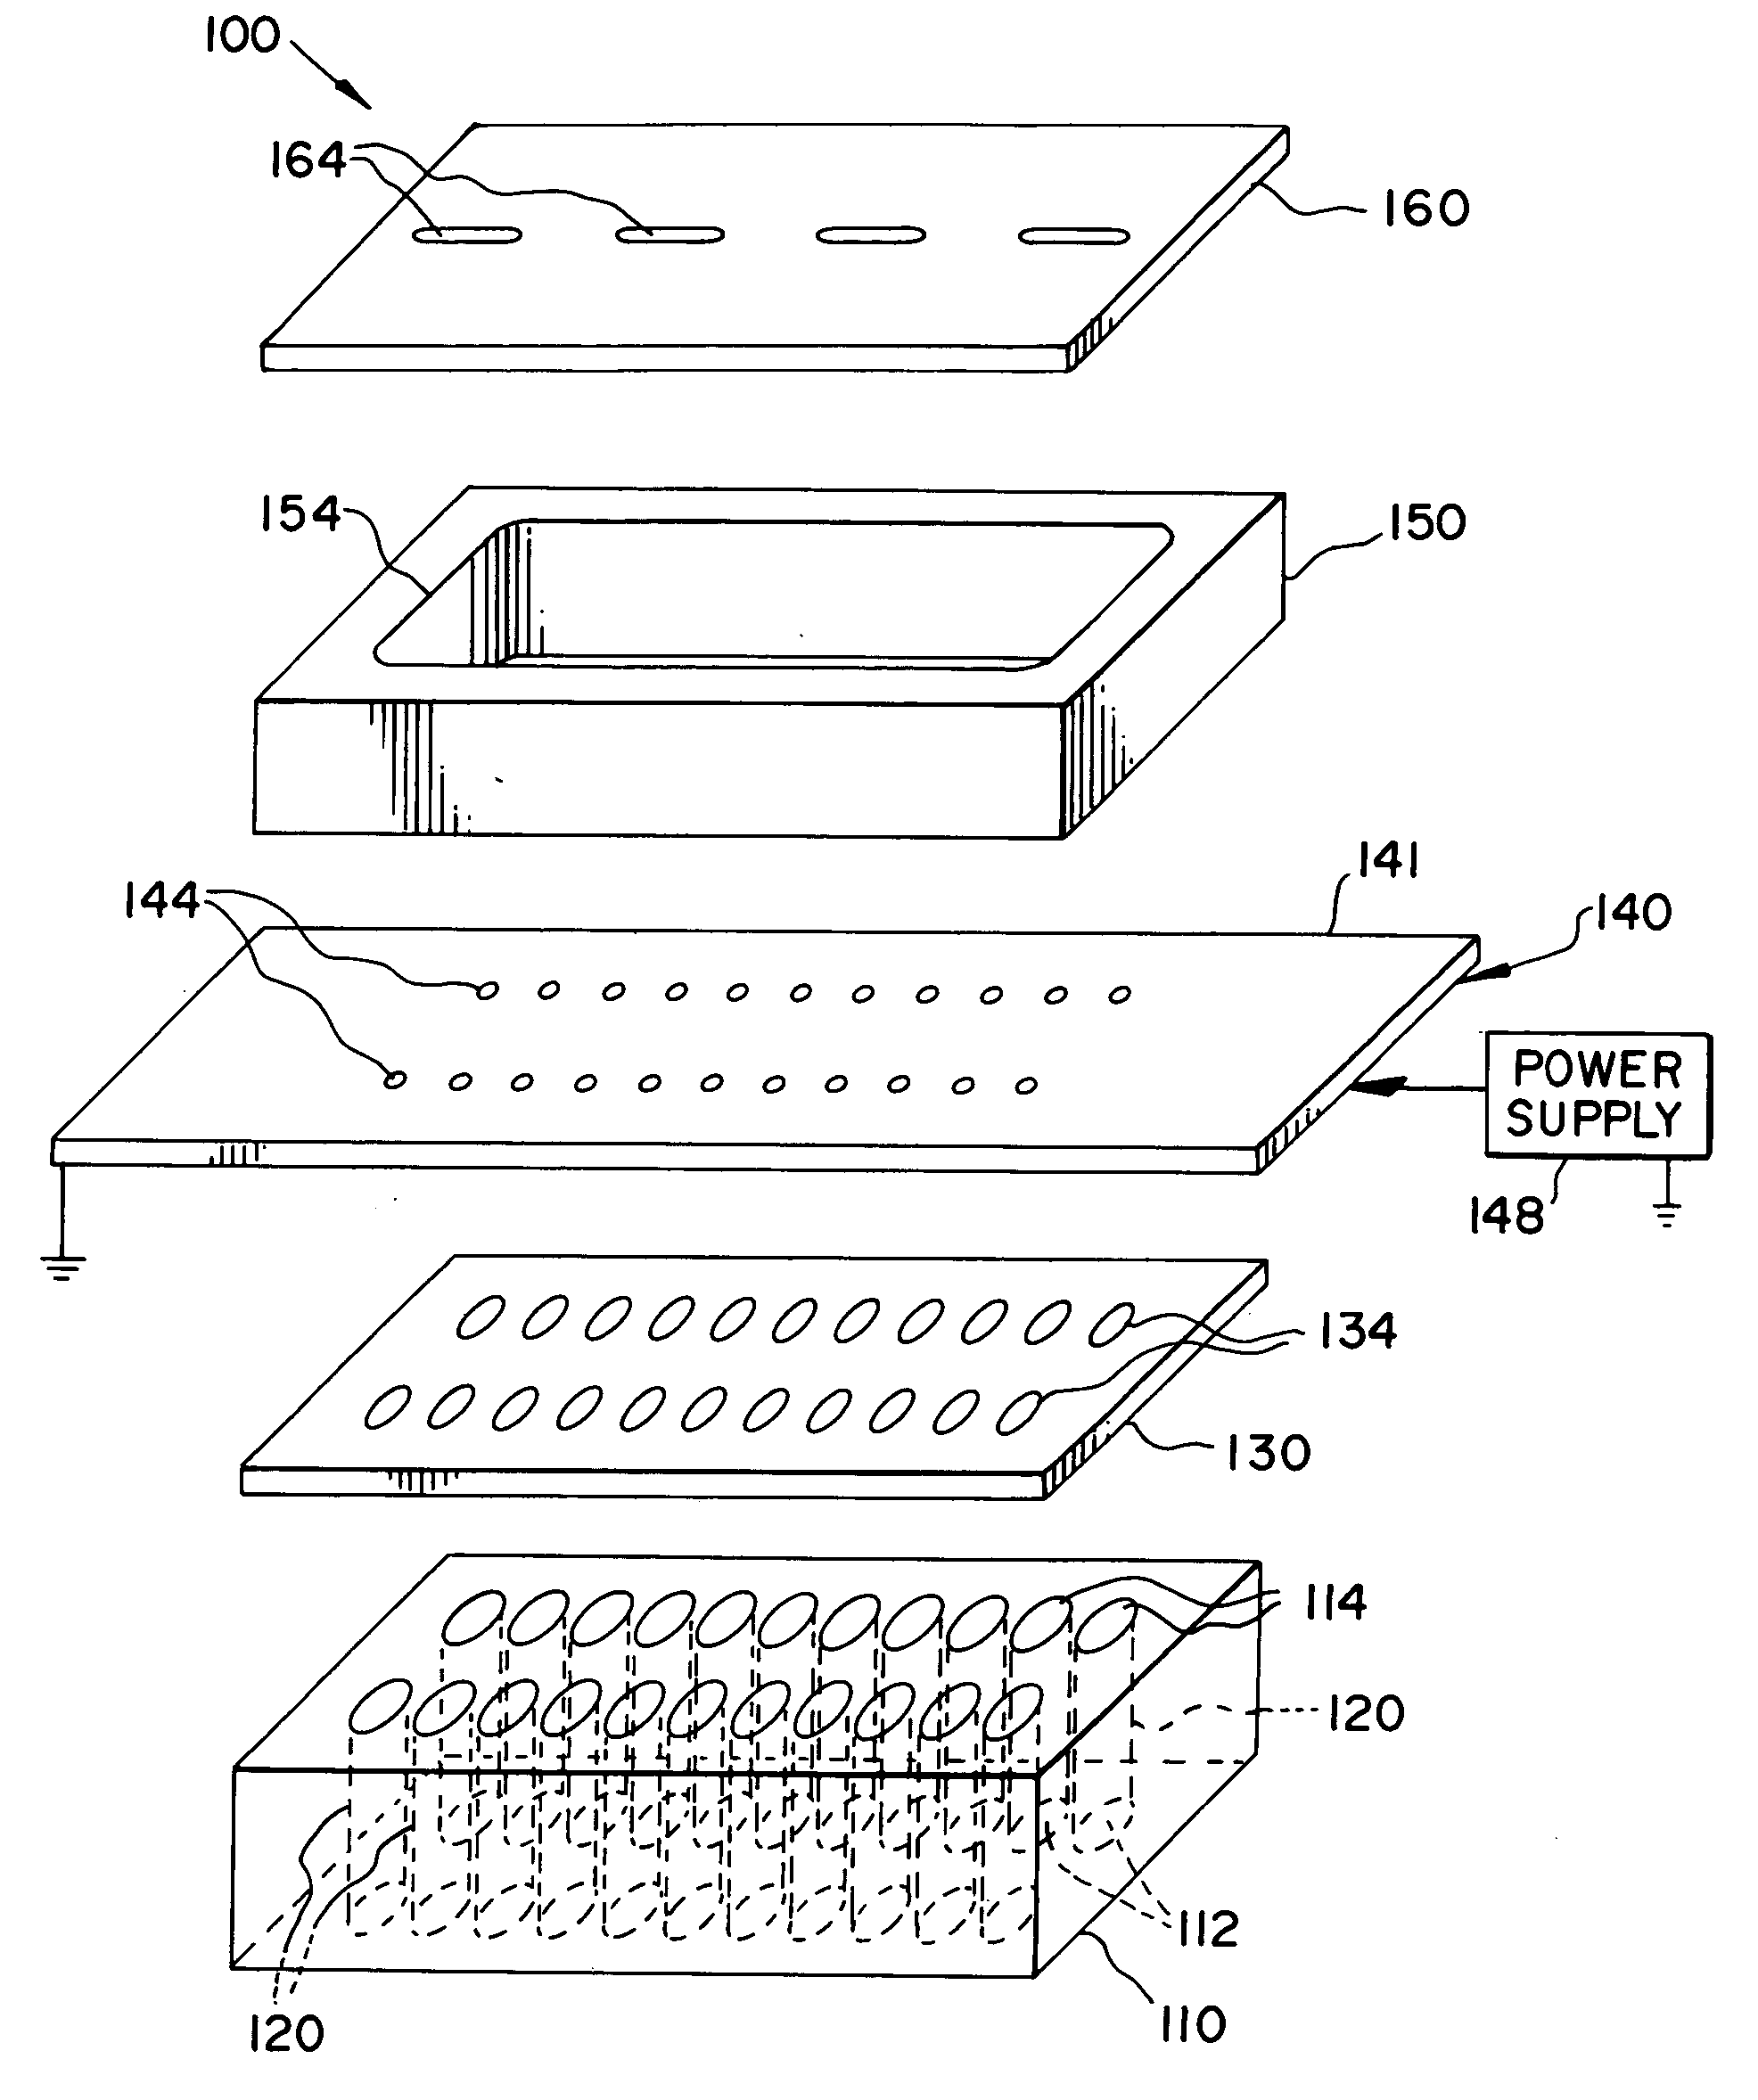 Thermal physical vapor deposition source using pellets of organic material for making OLED displays